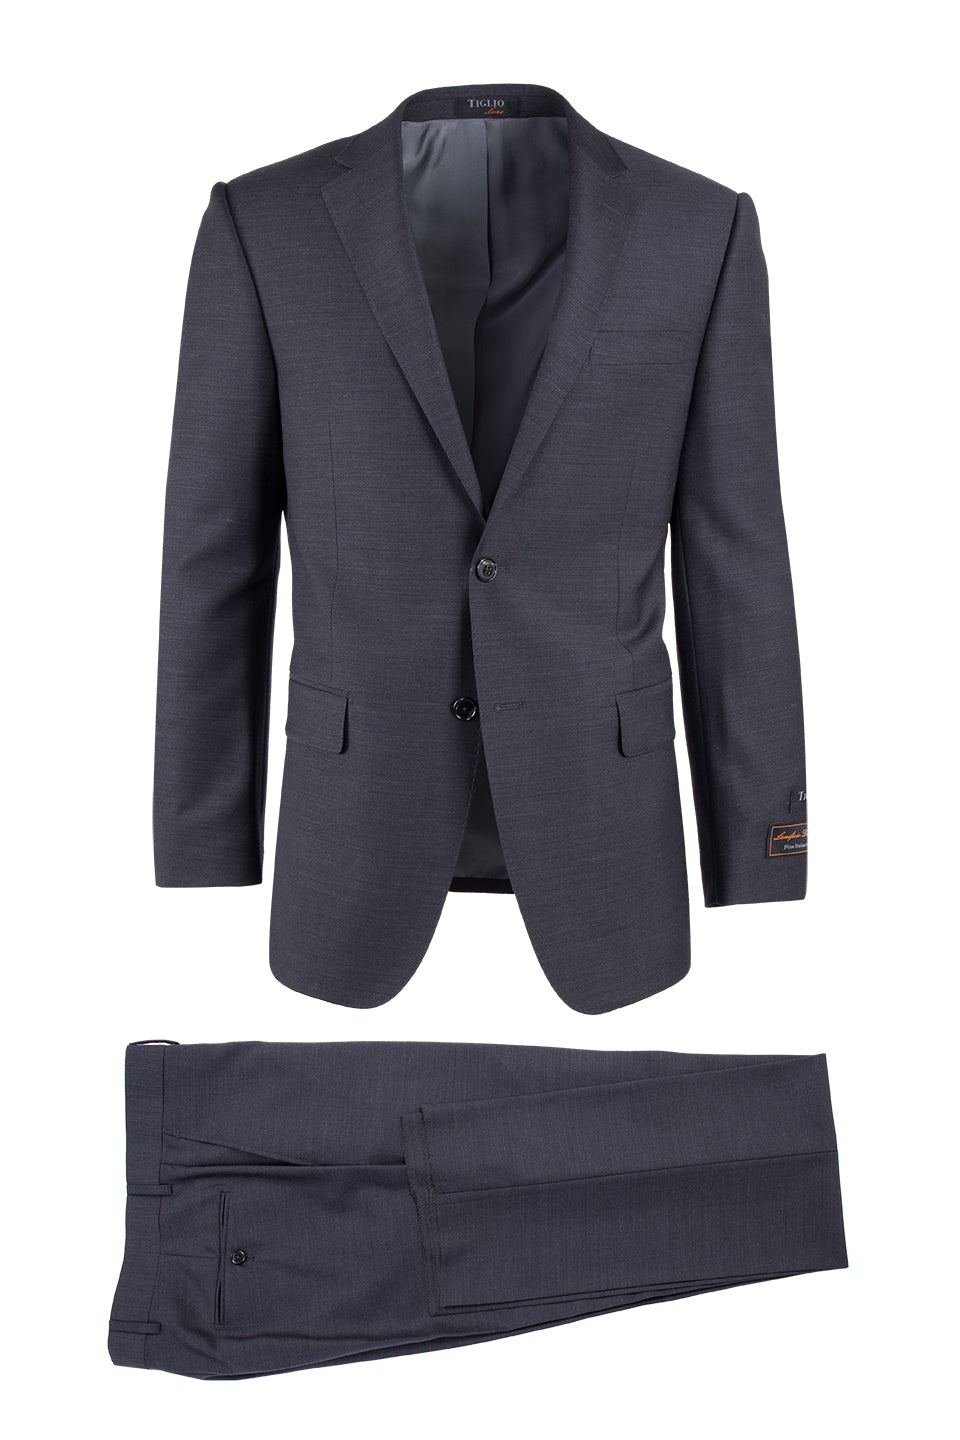 Tiglio Luxe Tiglio Gray, by Fit, TIG10 Novello Wool Pure Charcoal | Suit Modern